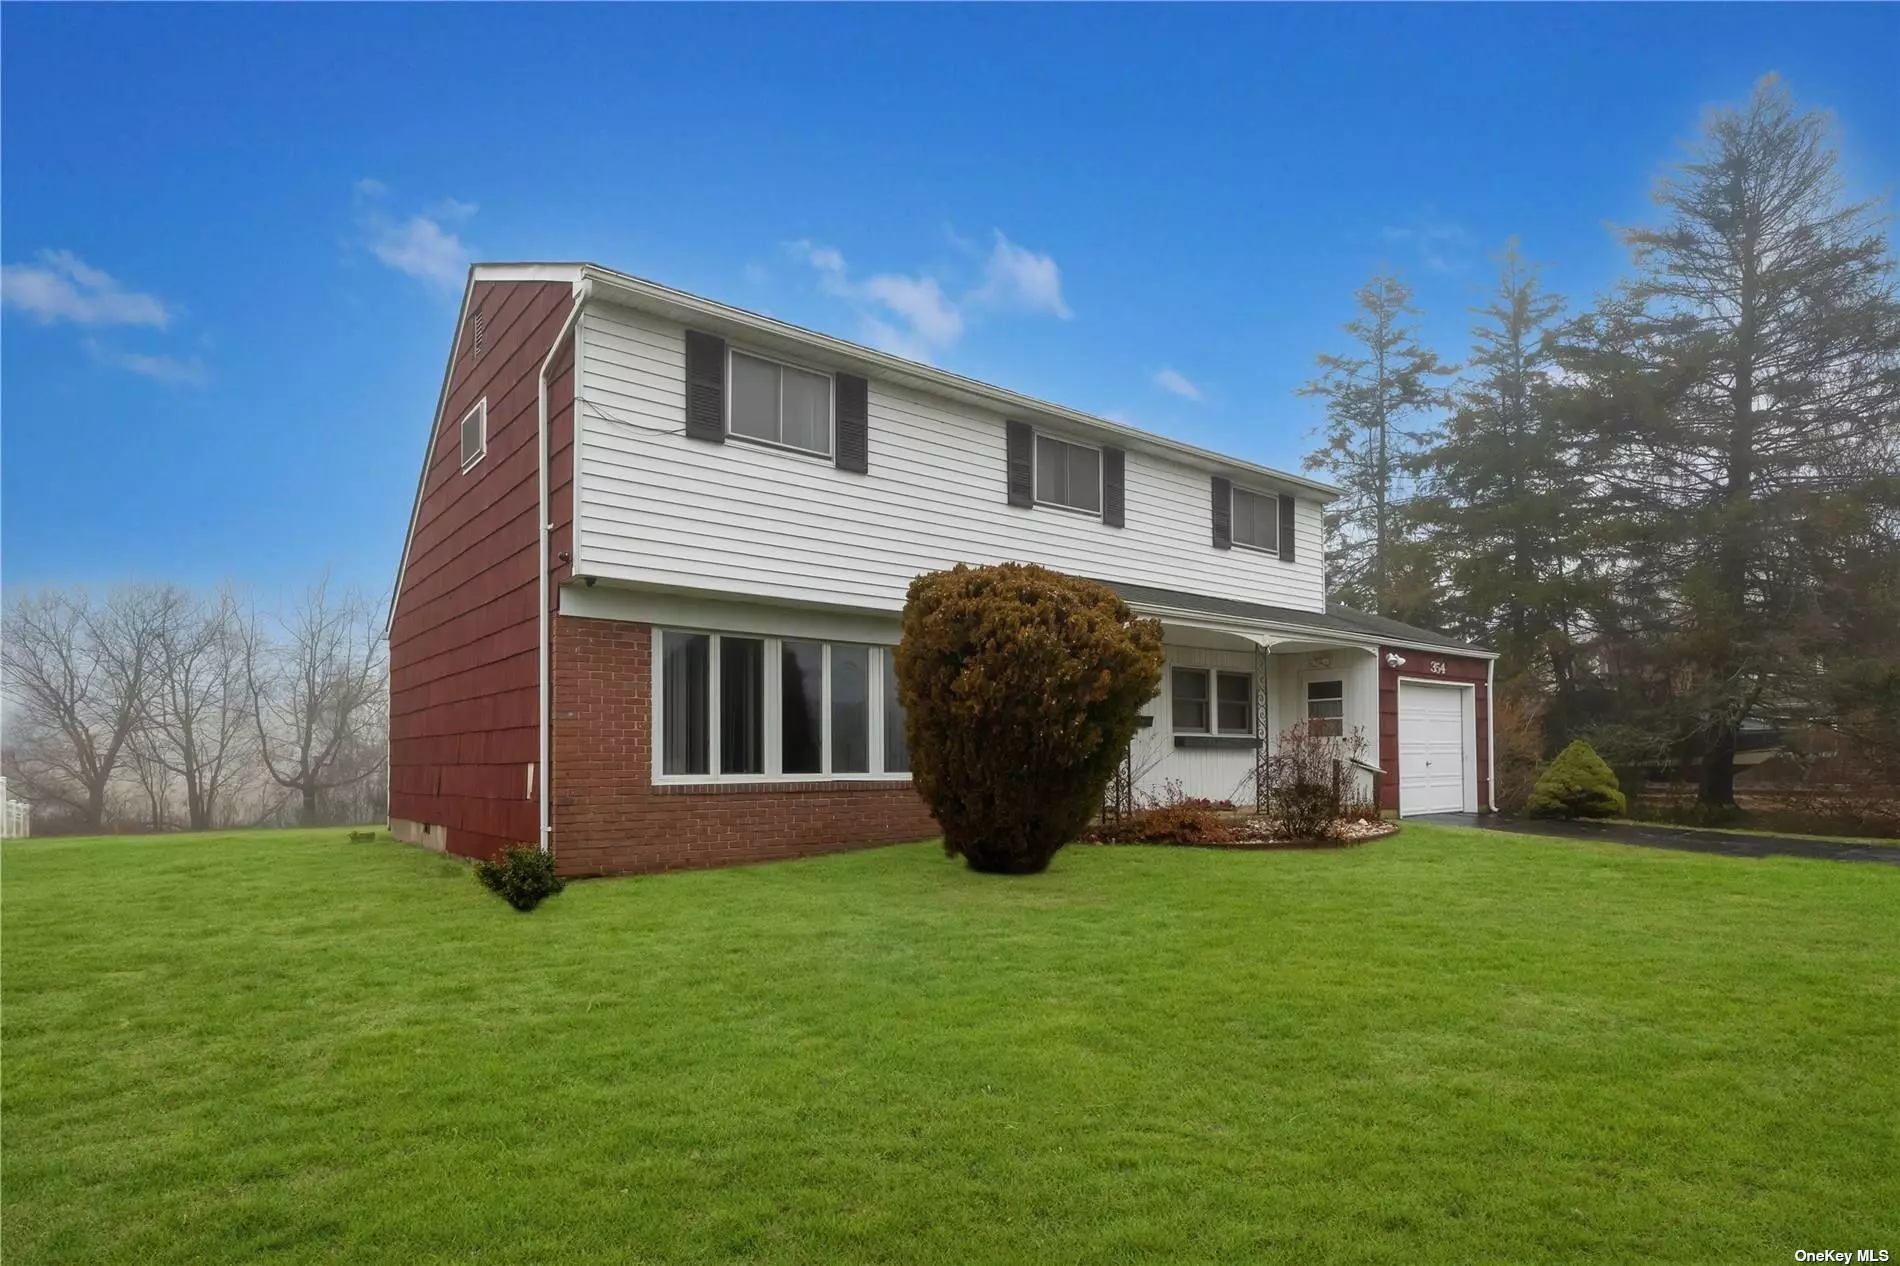 This 3 bedroom Colonial in a prime location is situated on 3/4 of an acre on a lake! Near Islip&rsquo;s Main Street, this home is close to shopping, dining, schools, parks, beaches and more! Don&rsquo;t hesitate - won&rsquo;t last!